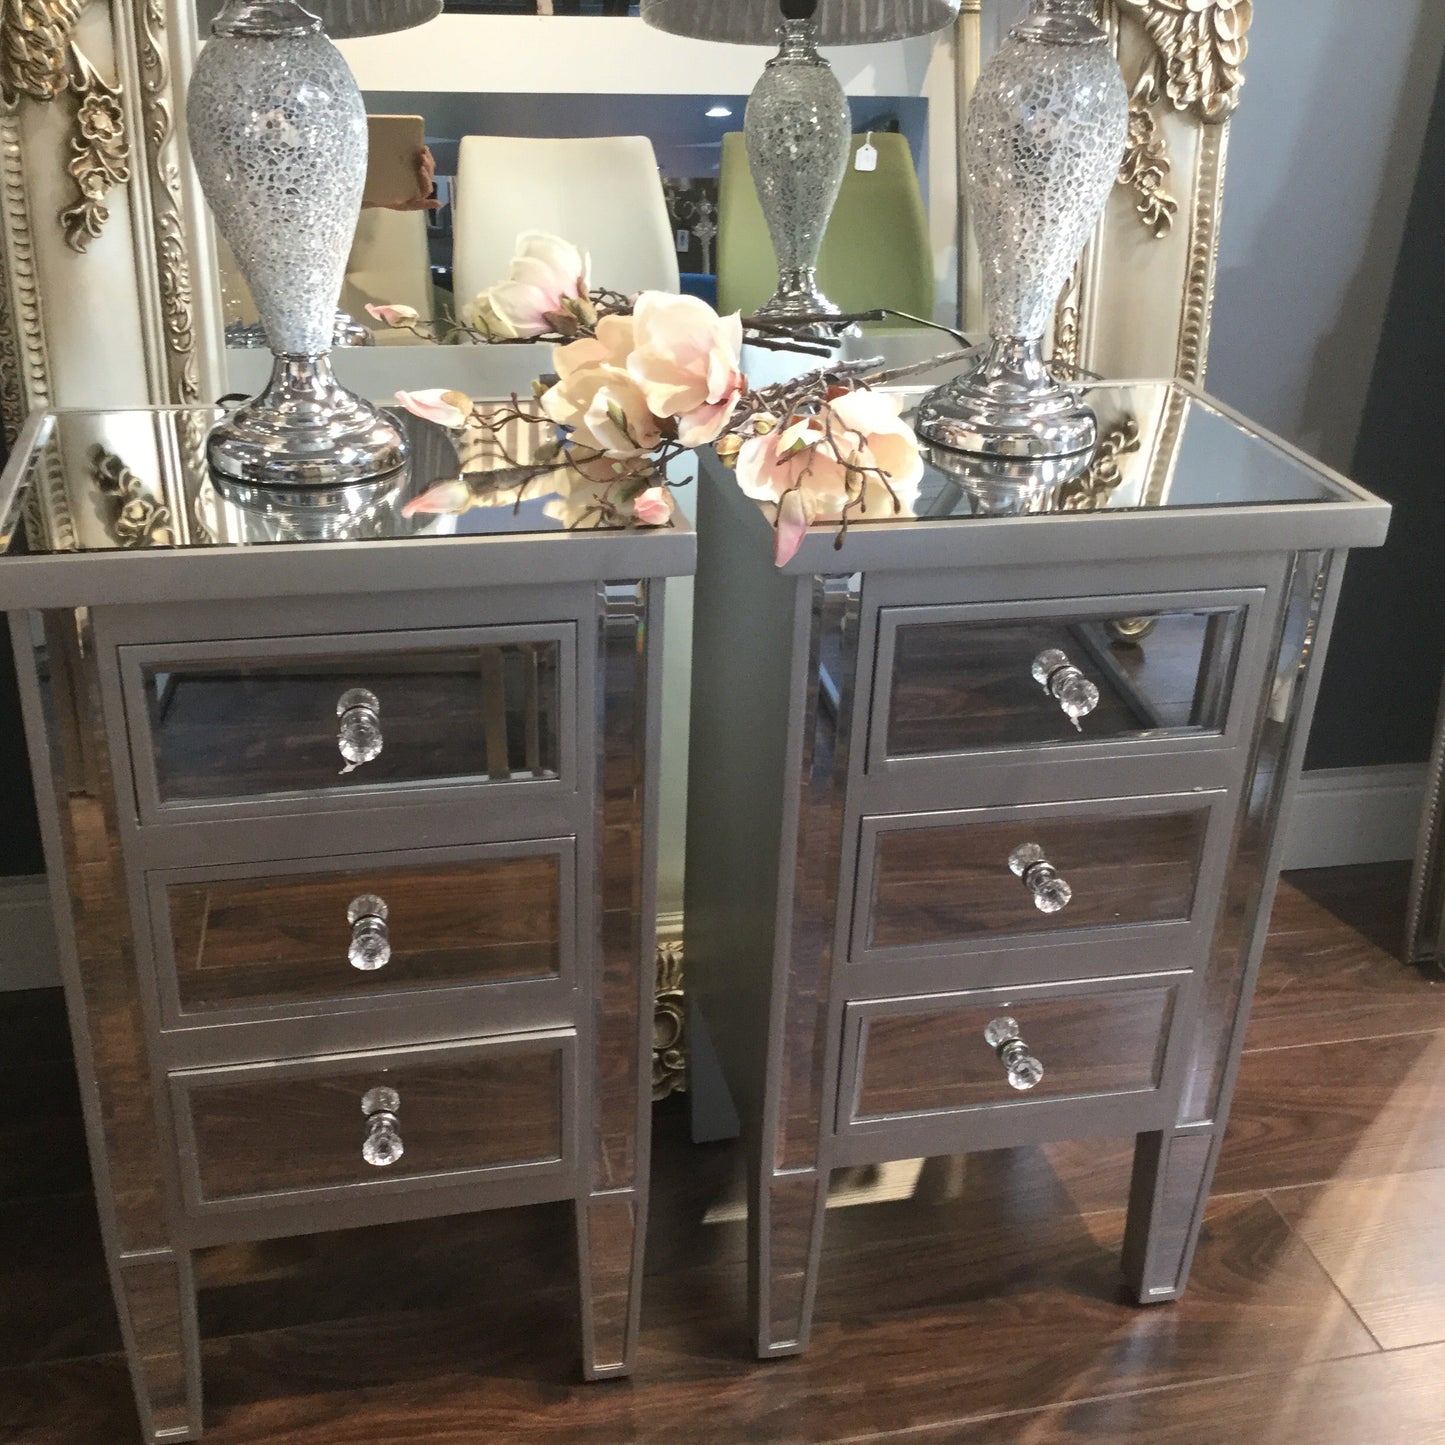 Maguire mirrored 3 drawer bedside Locker REDUCED  click n collect only